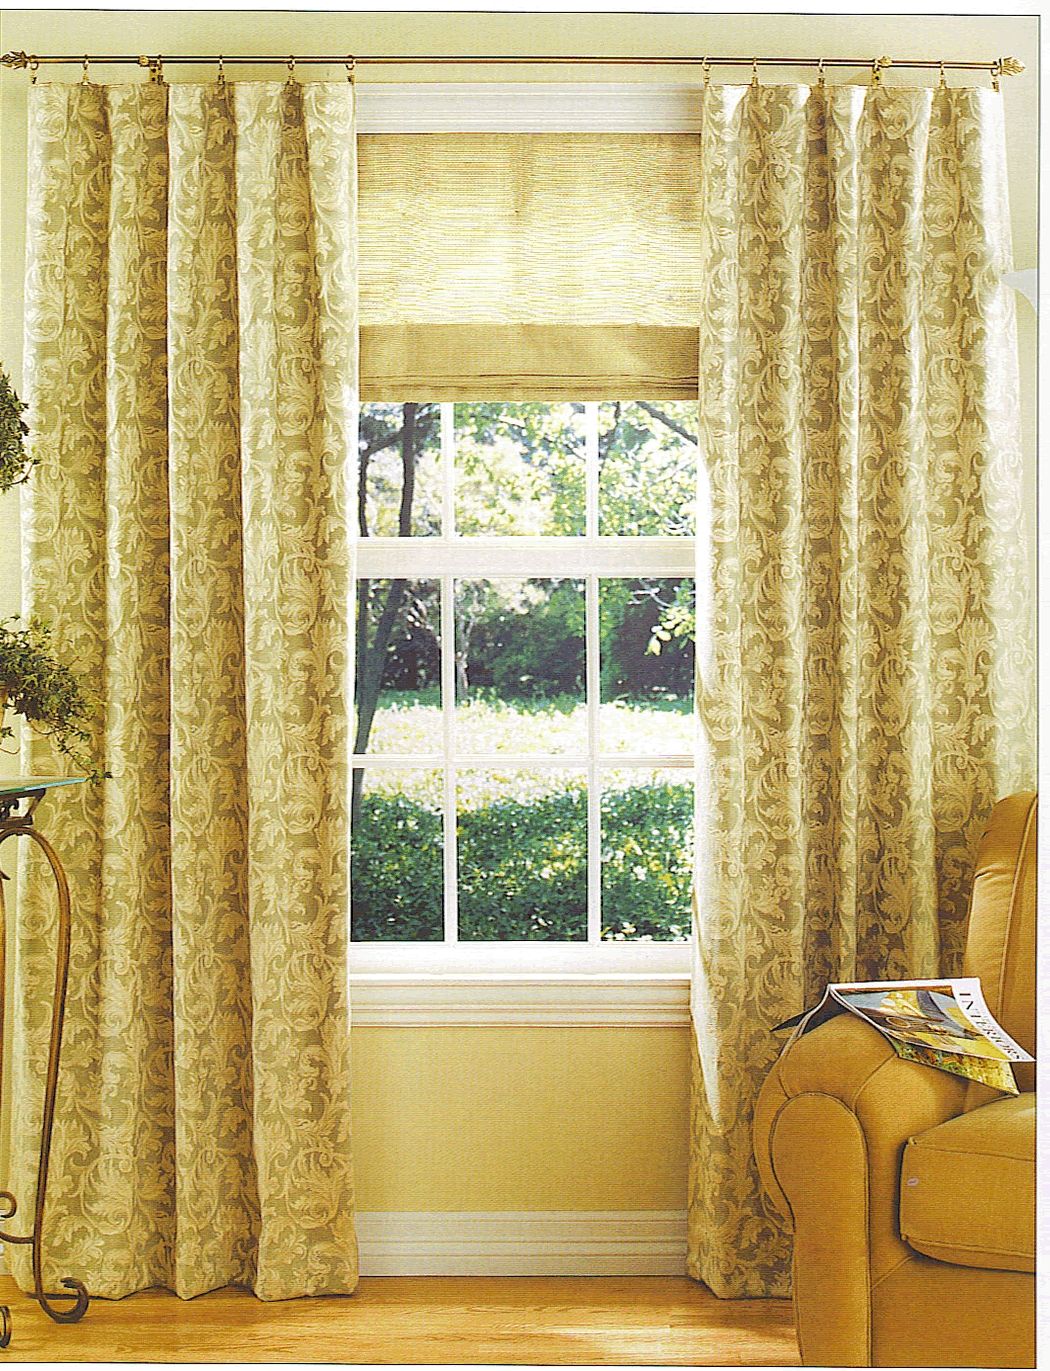 Curtain Ideas For Very Small Windows Glory Window Decor Also Throughout Curtains Windows (View 22 of 25)